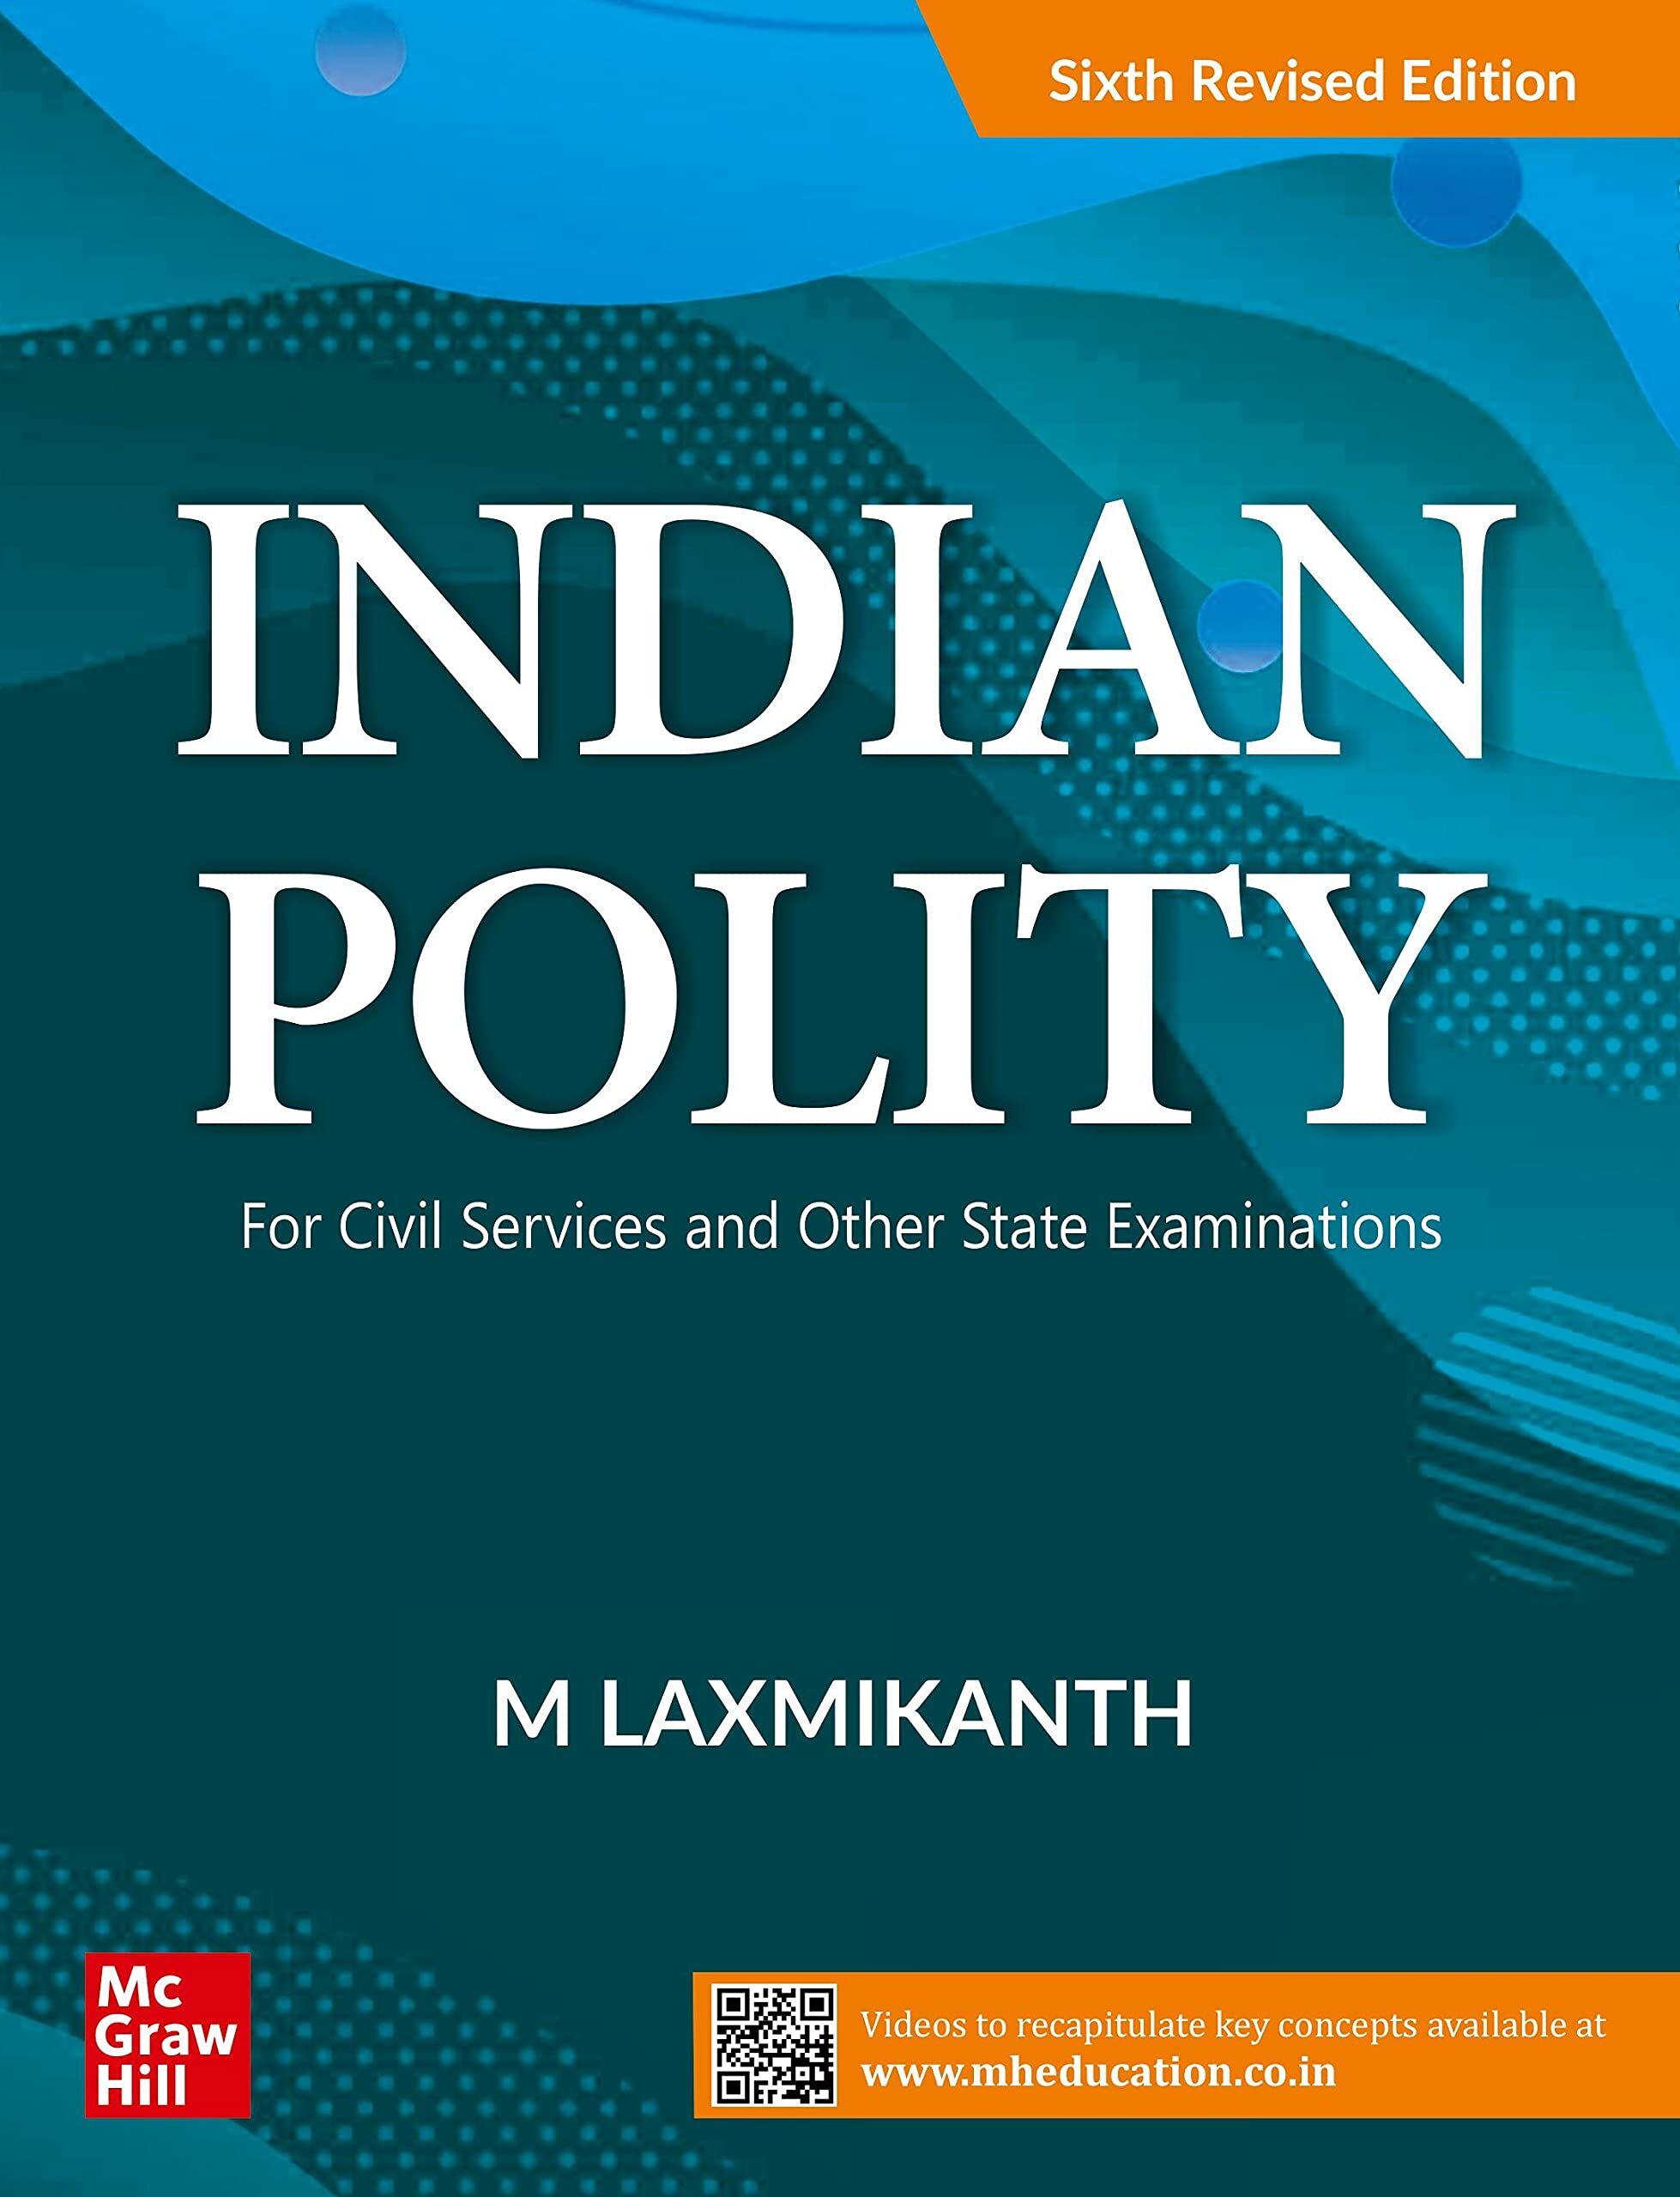 Indian Polity by M. Laxmikant